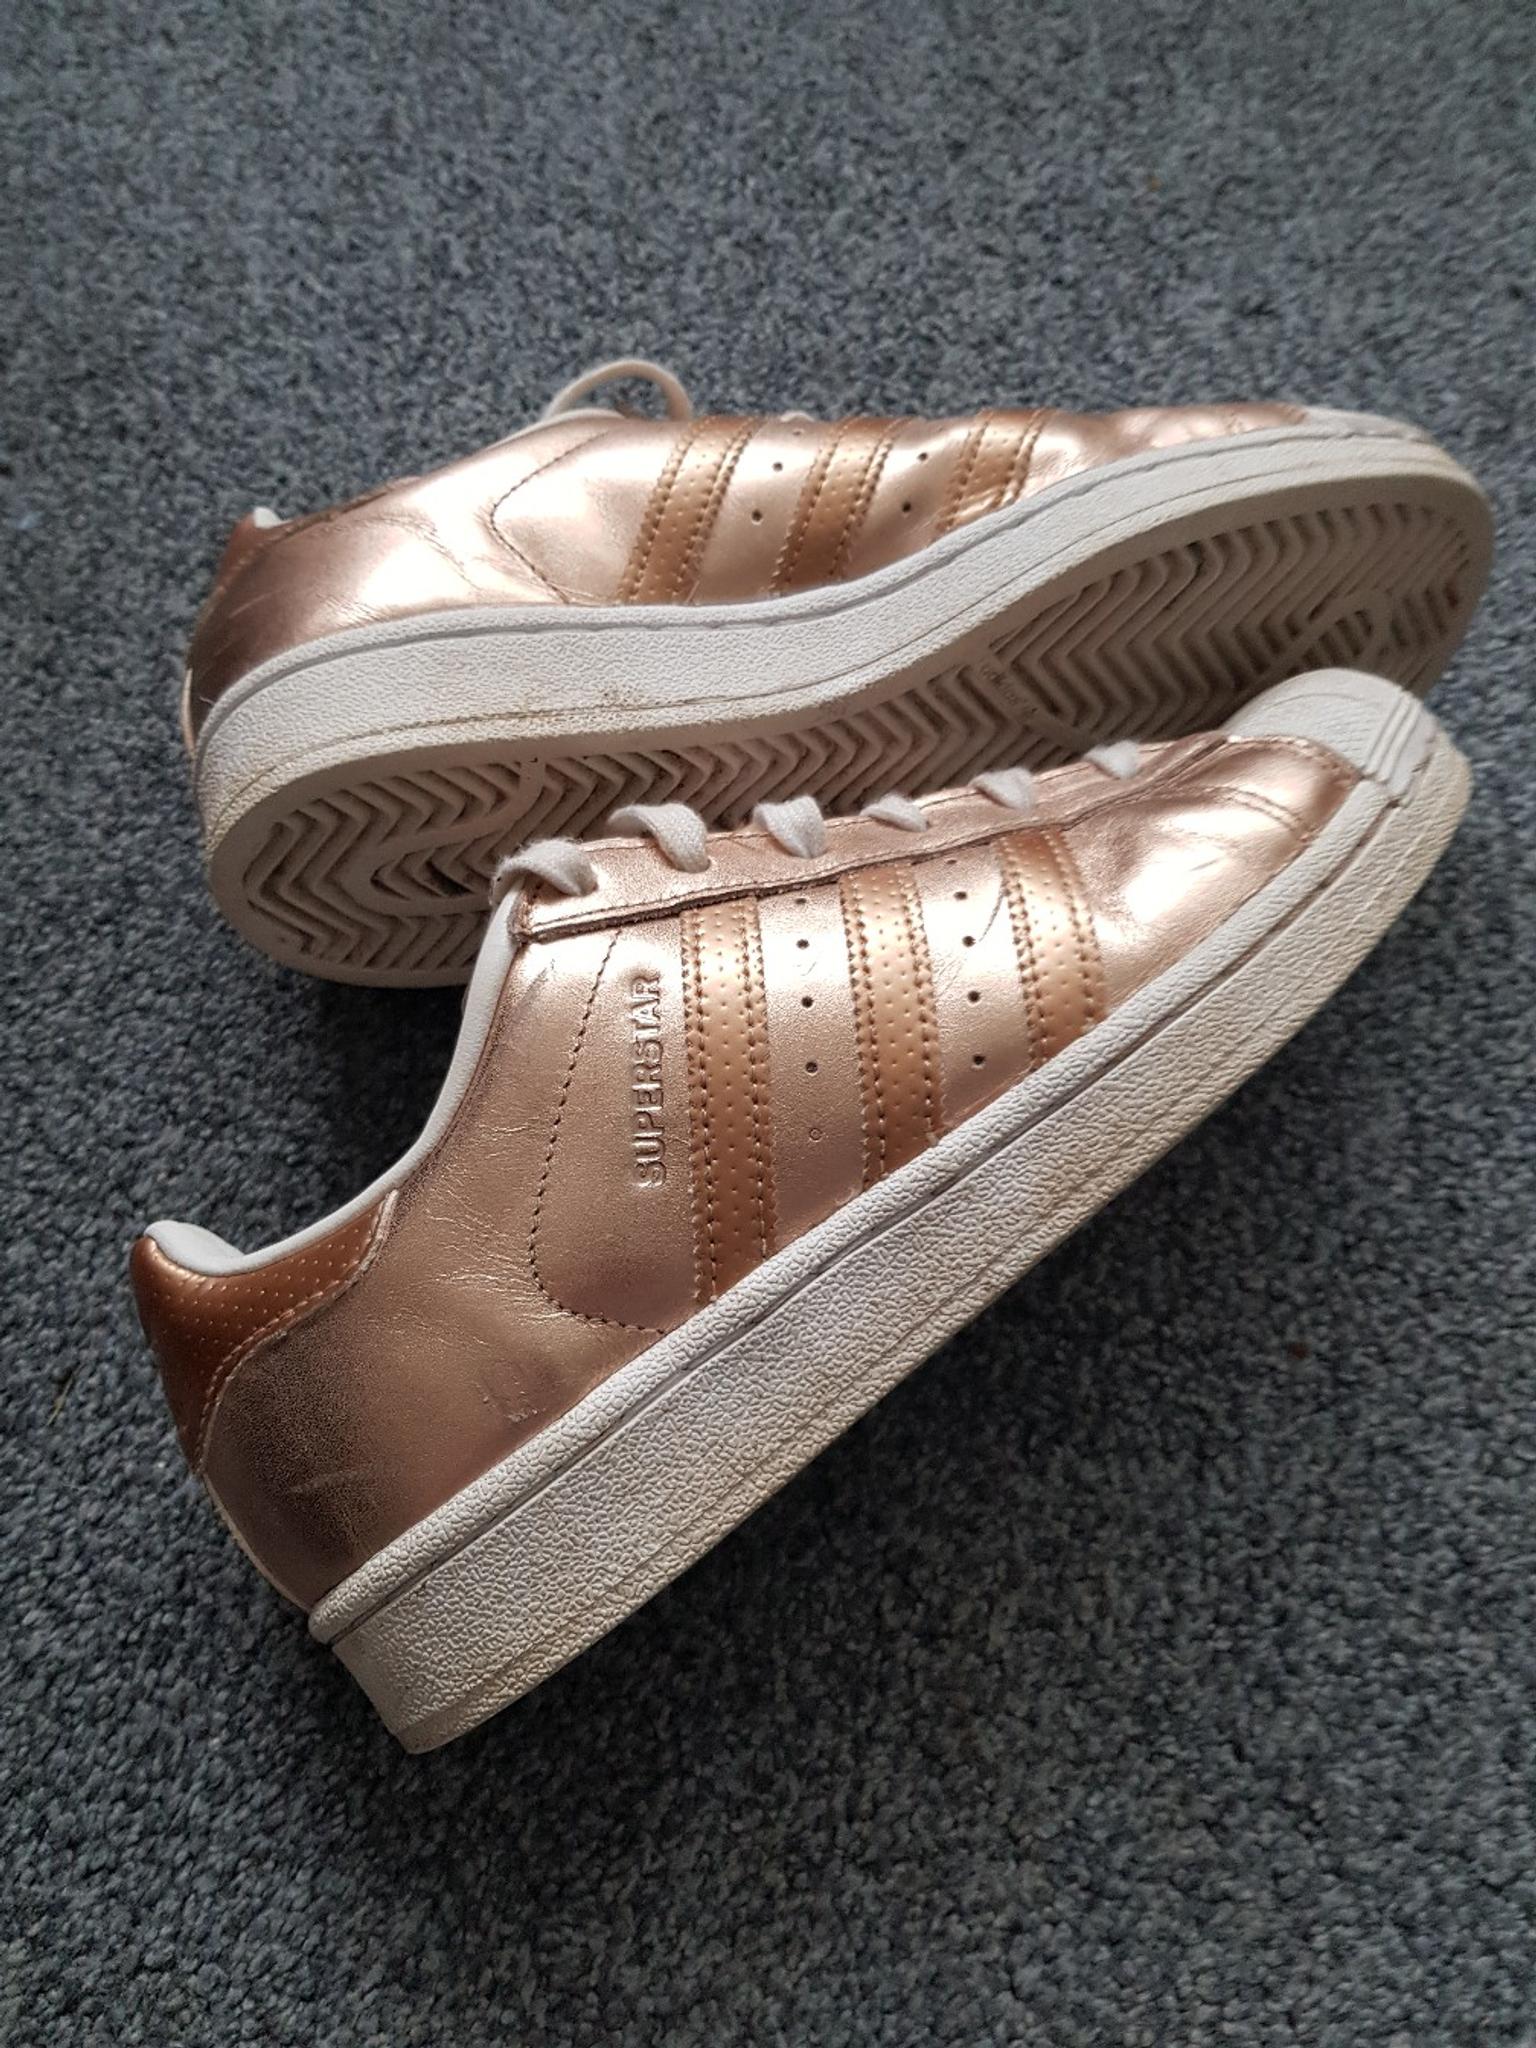 adidas superstar rose gold limited edition